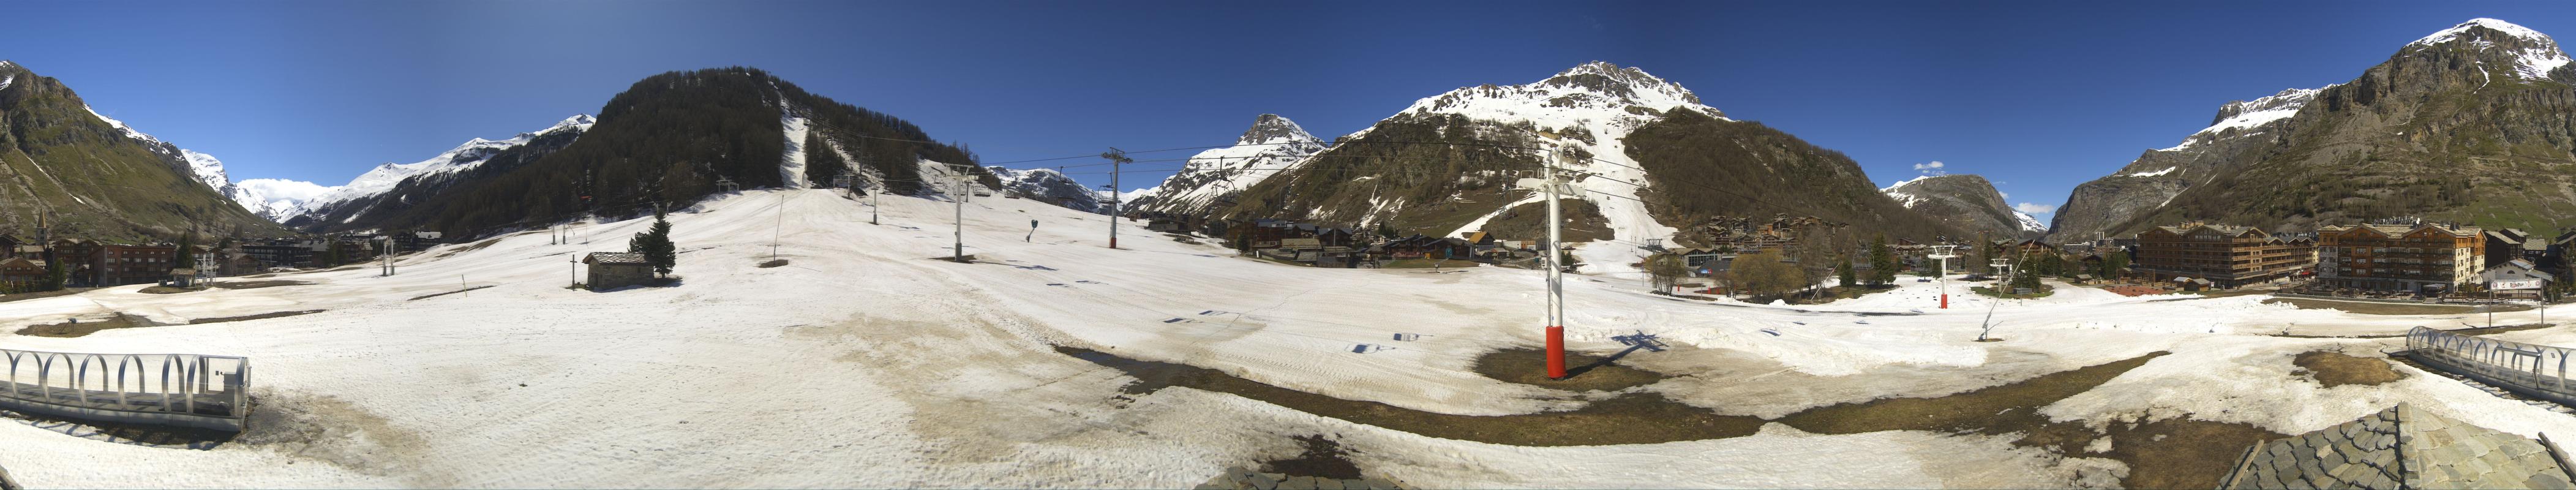 Val d'Isere web cam - village and nursery slope panorama